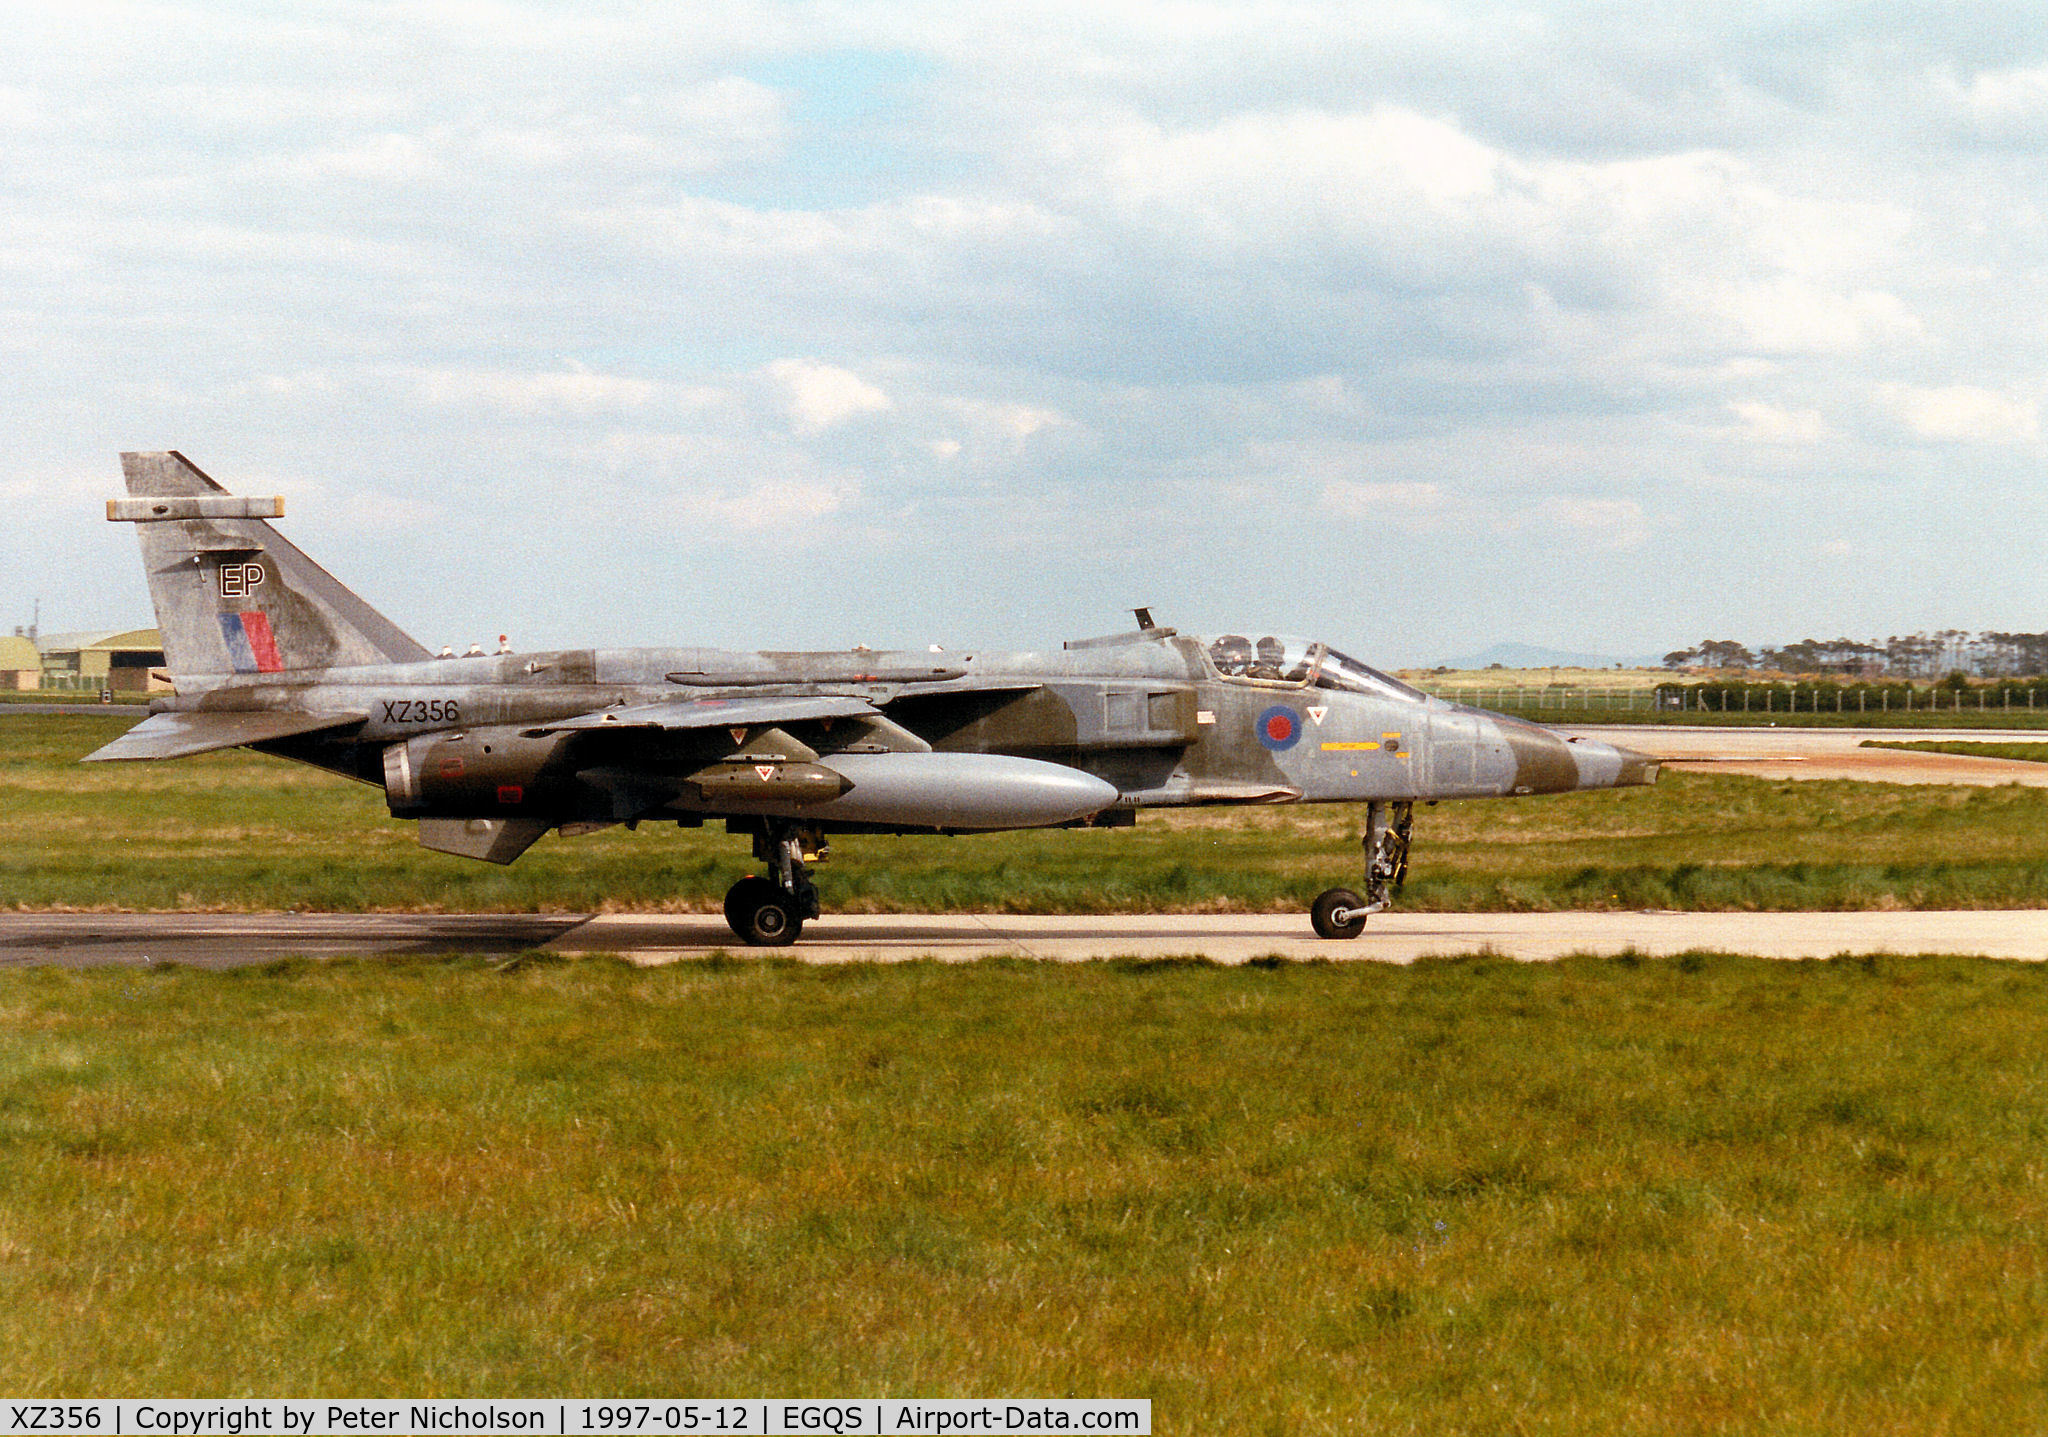 XZ356, 1976 Sepecat Jaguar GR.1A C/N S.123, Jaguar GR.1A of 6 Squadron at RAF Coltishall taxying to the active runway at RAF Lossiemouth in the Summer of 1997.